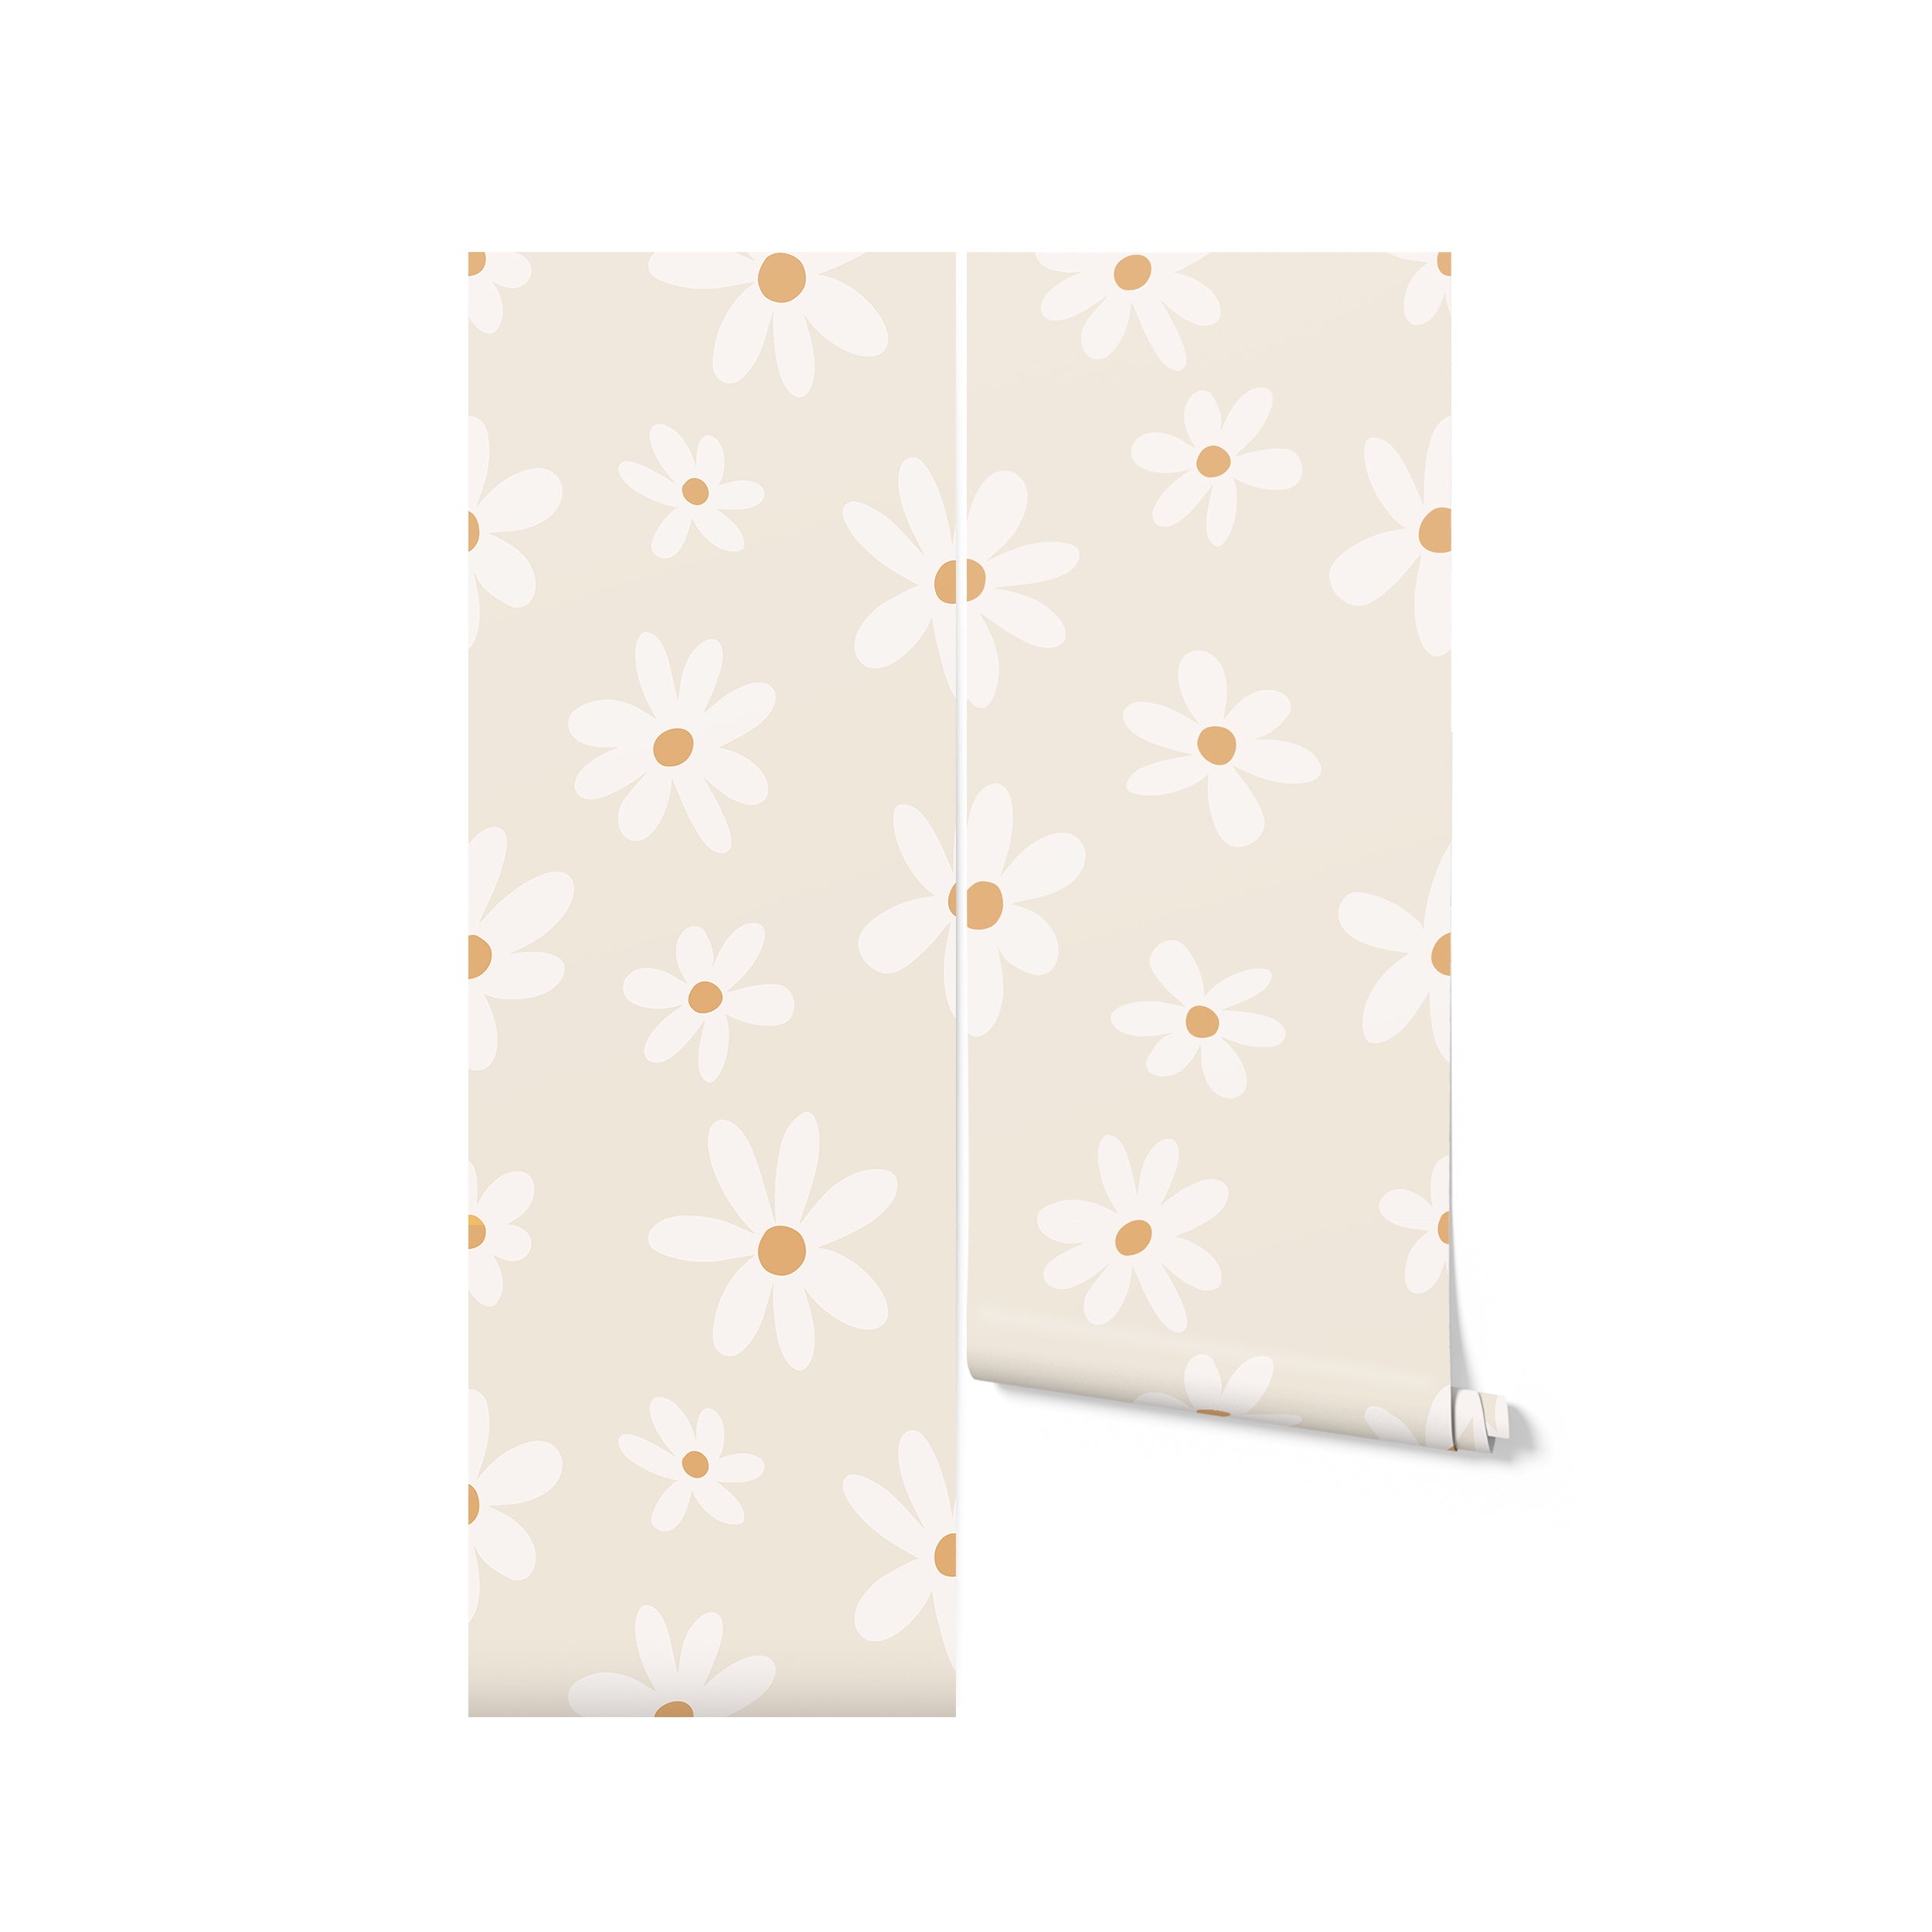 A rolled piece of Simple Daisy Wallpaper showing off the repeating pattern of large, stylized daisies, ready to brighten up any room with its simple yet playful design.